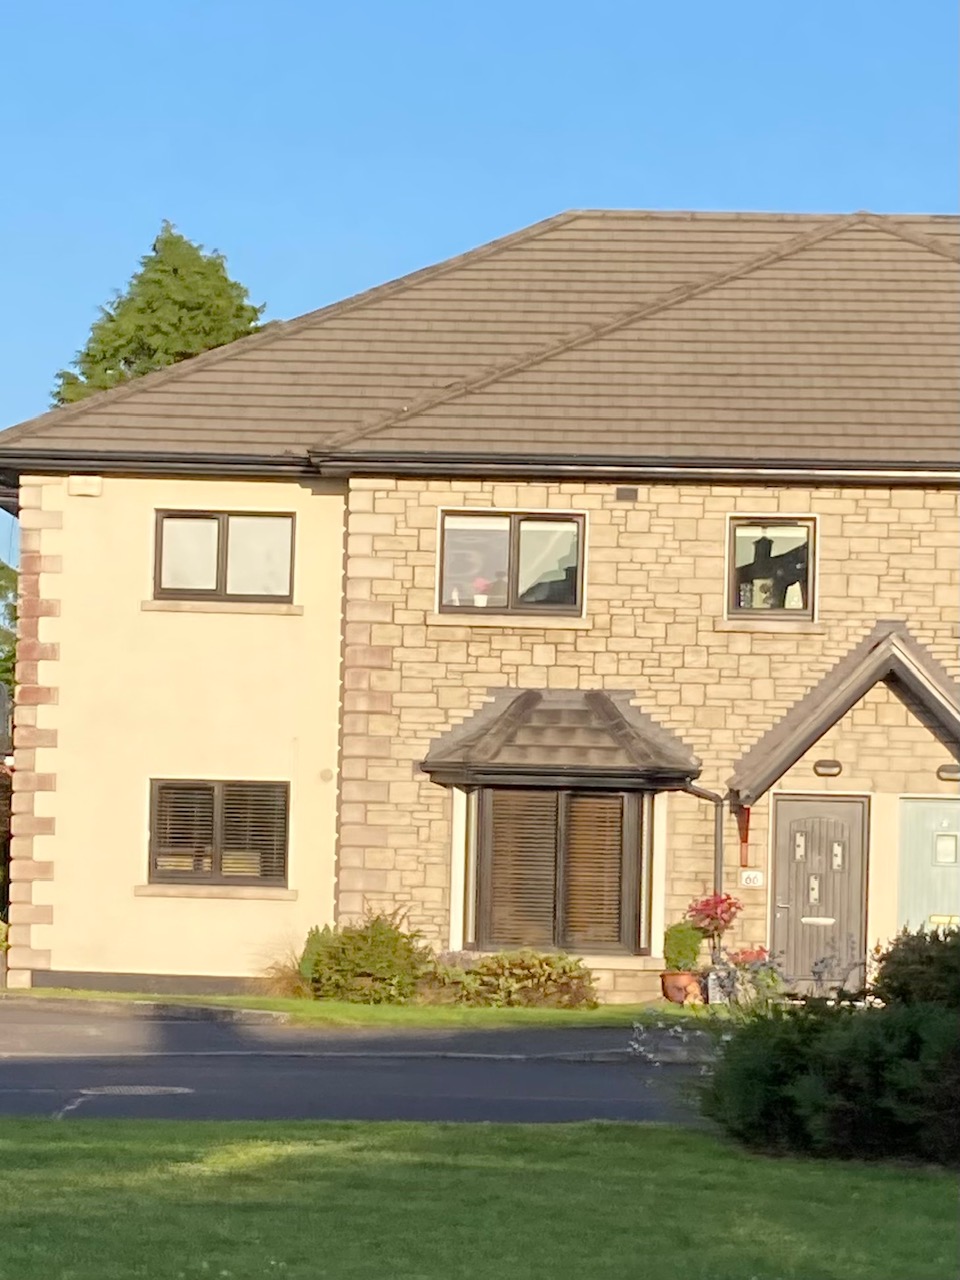 64 Coill Clocha, Oranmore, Co Galway, H91 KRR7